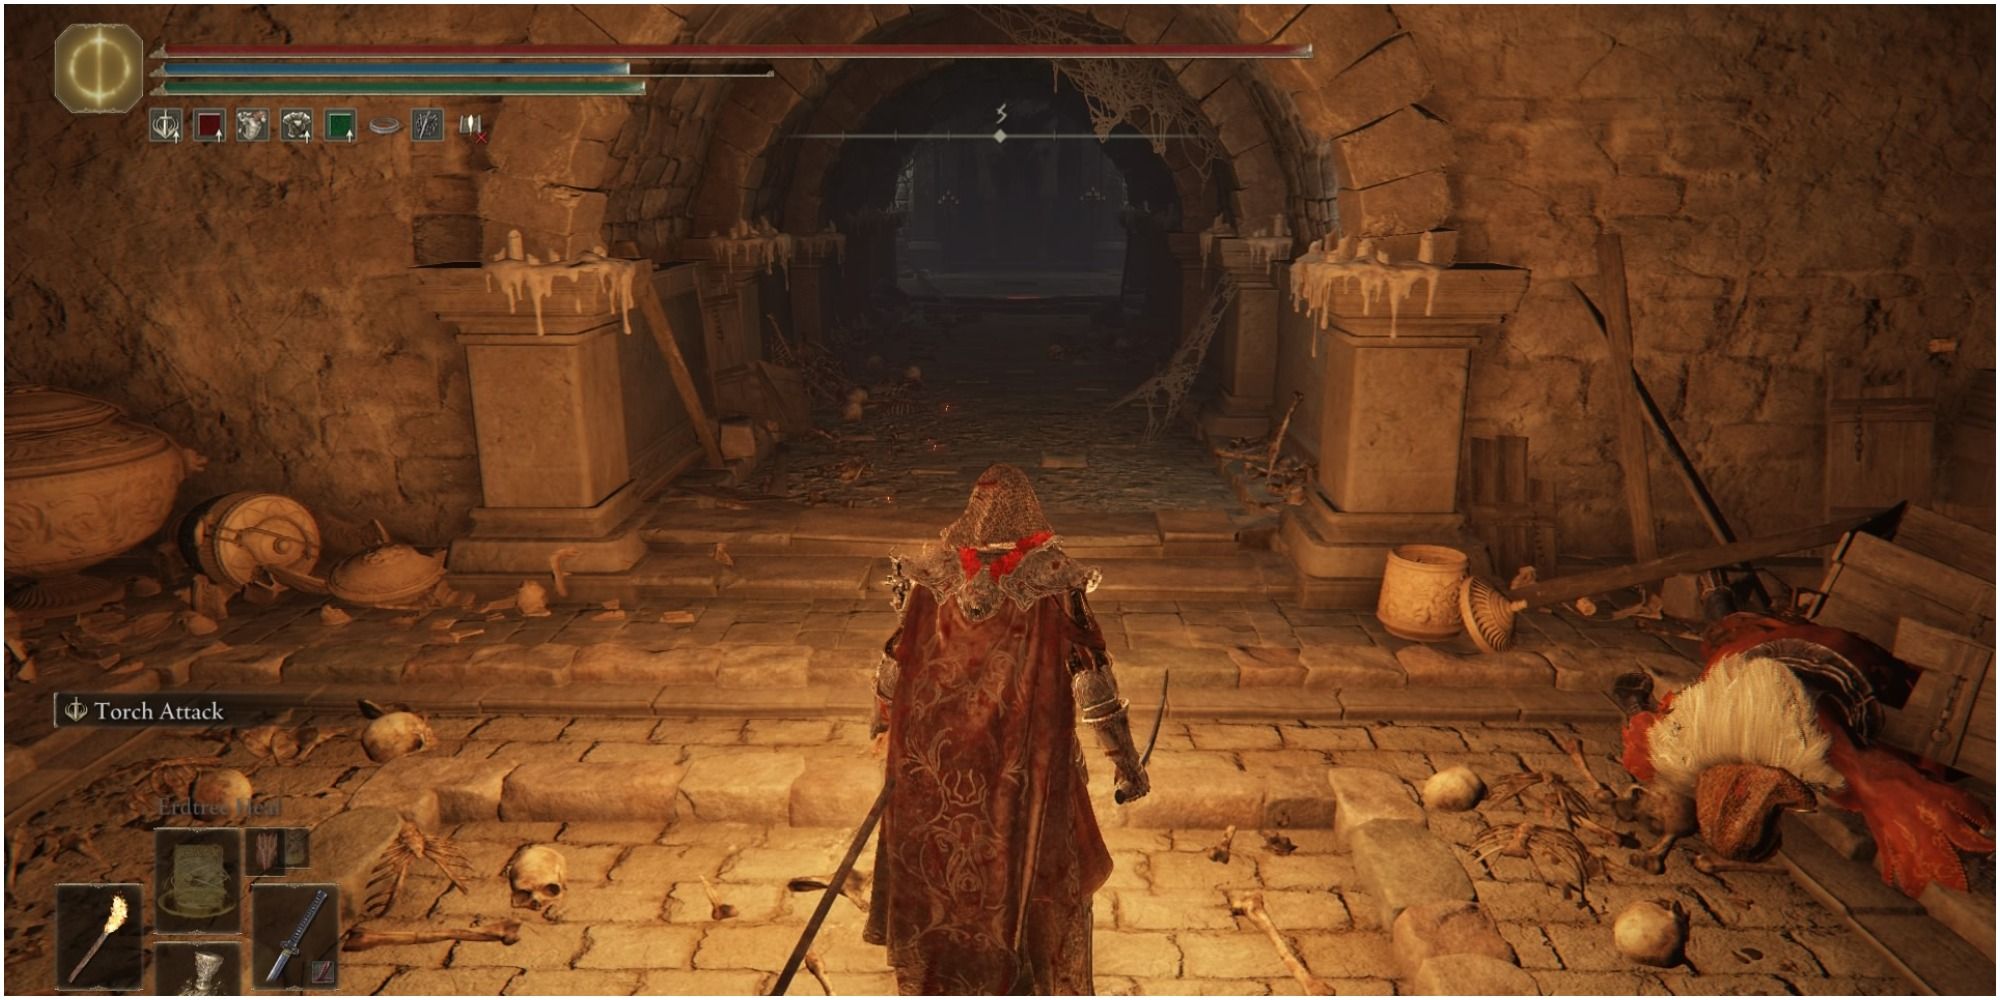 The player approaching the lift through the passageway.